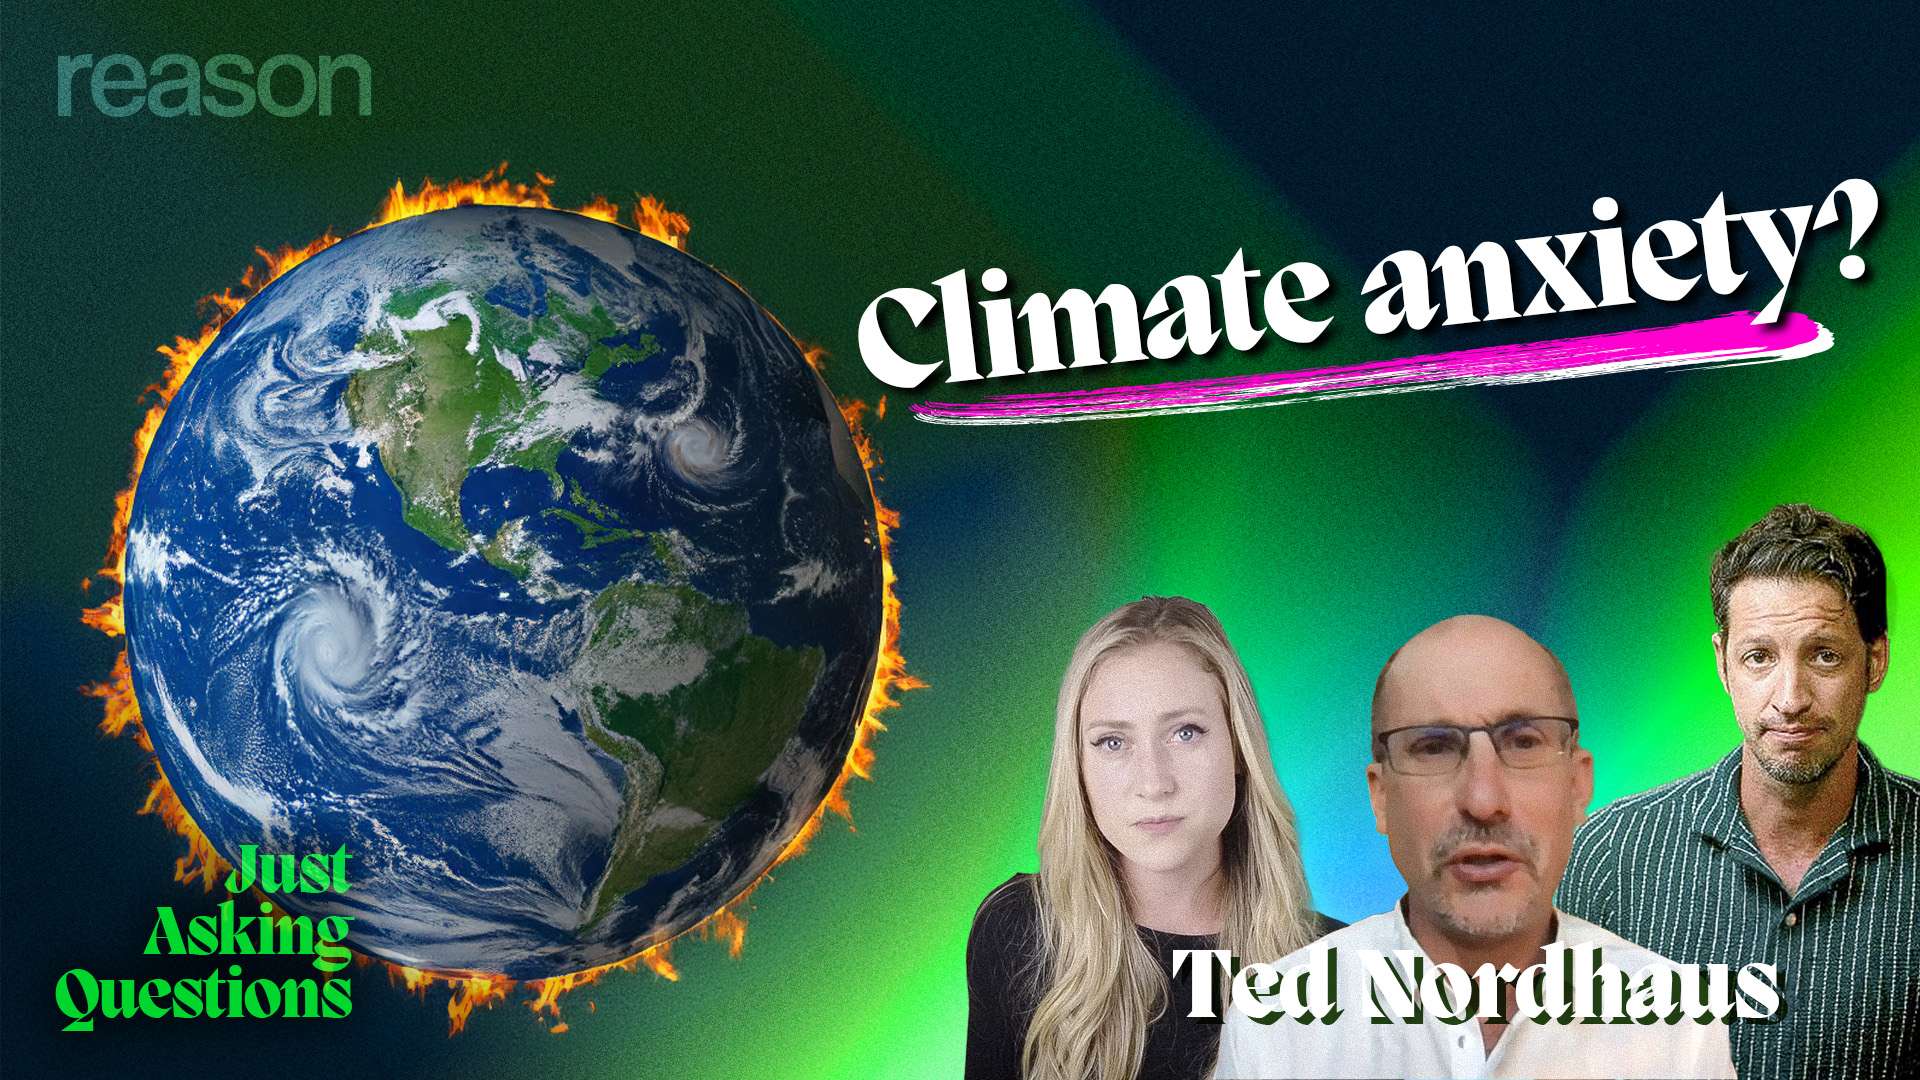 Ted Nordhaus: How bad is climate change?